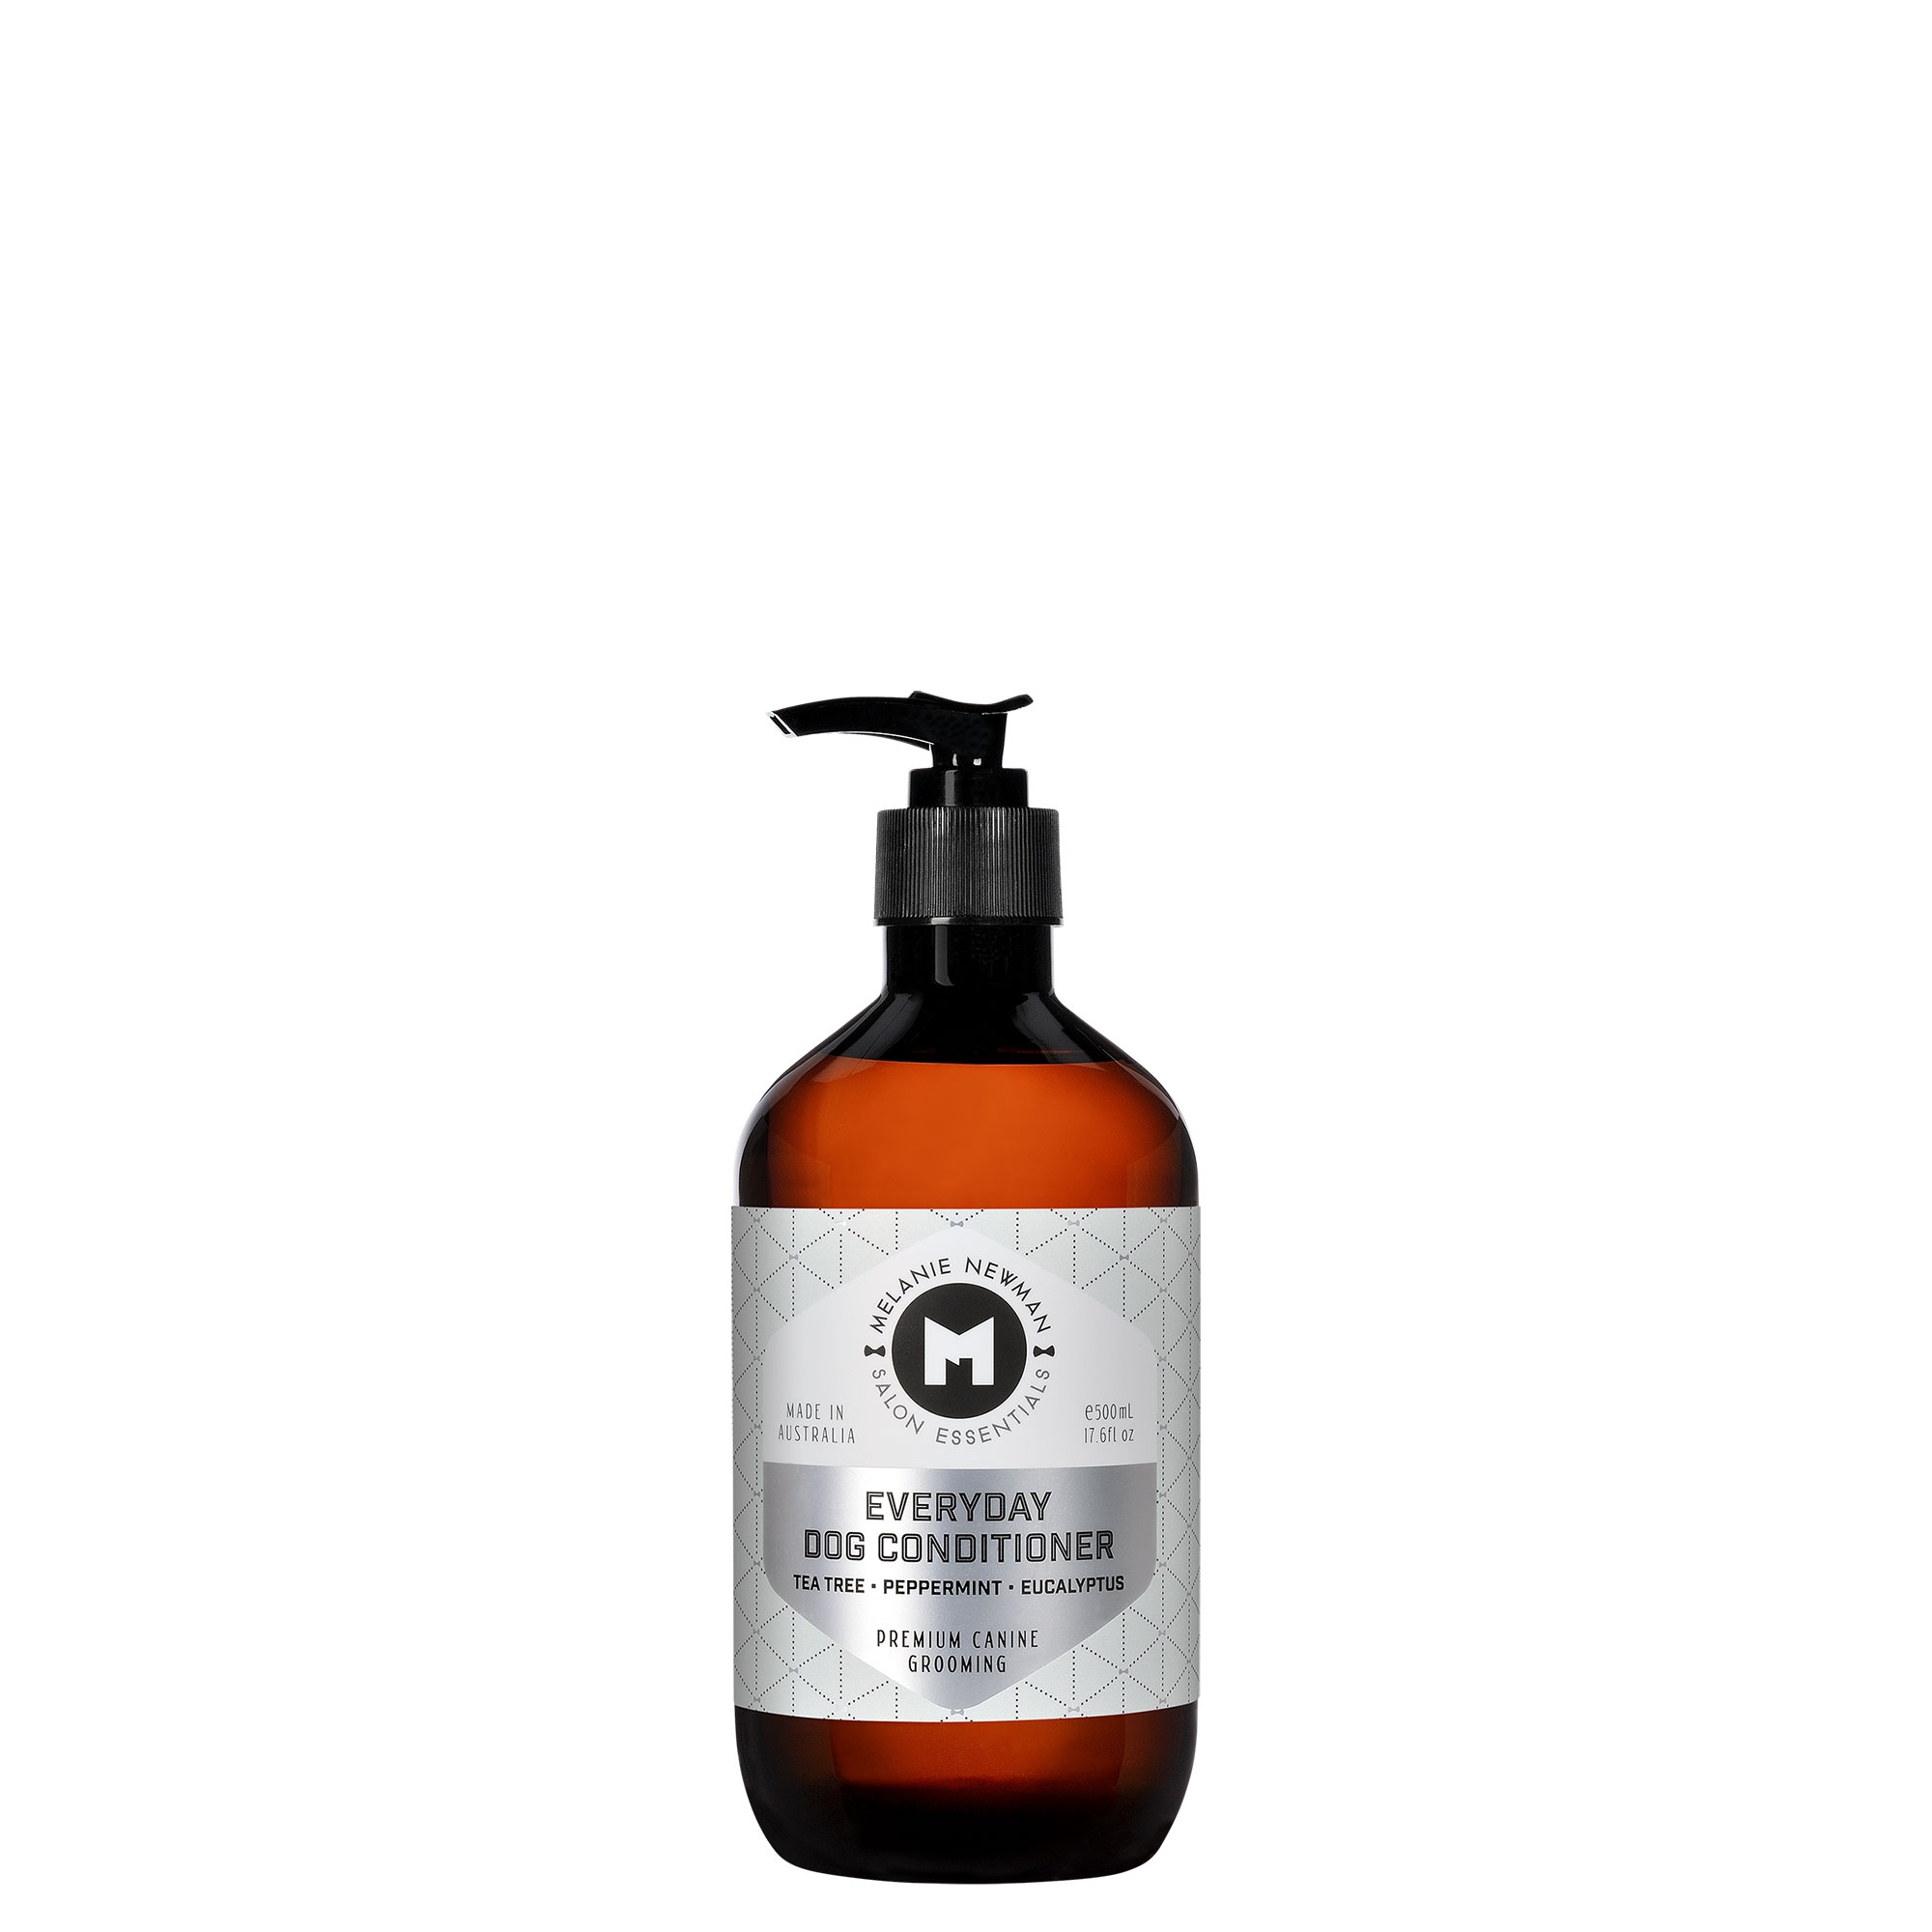 melanie newman everyday conditioner 500ml for dog grooming